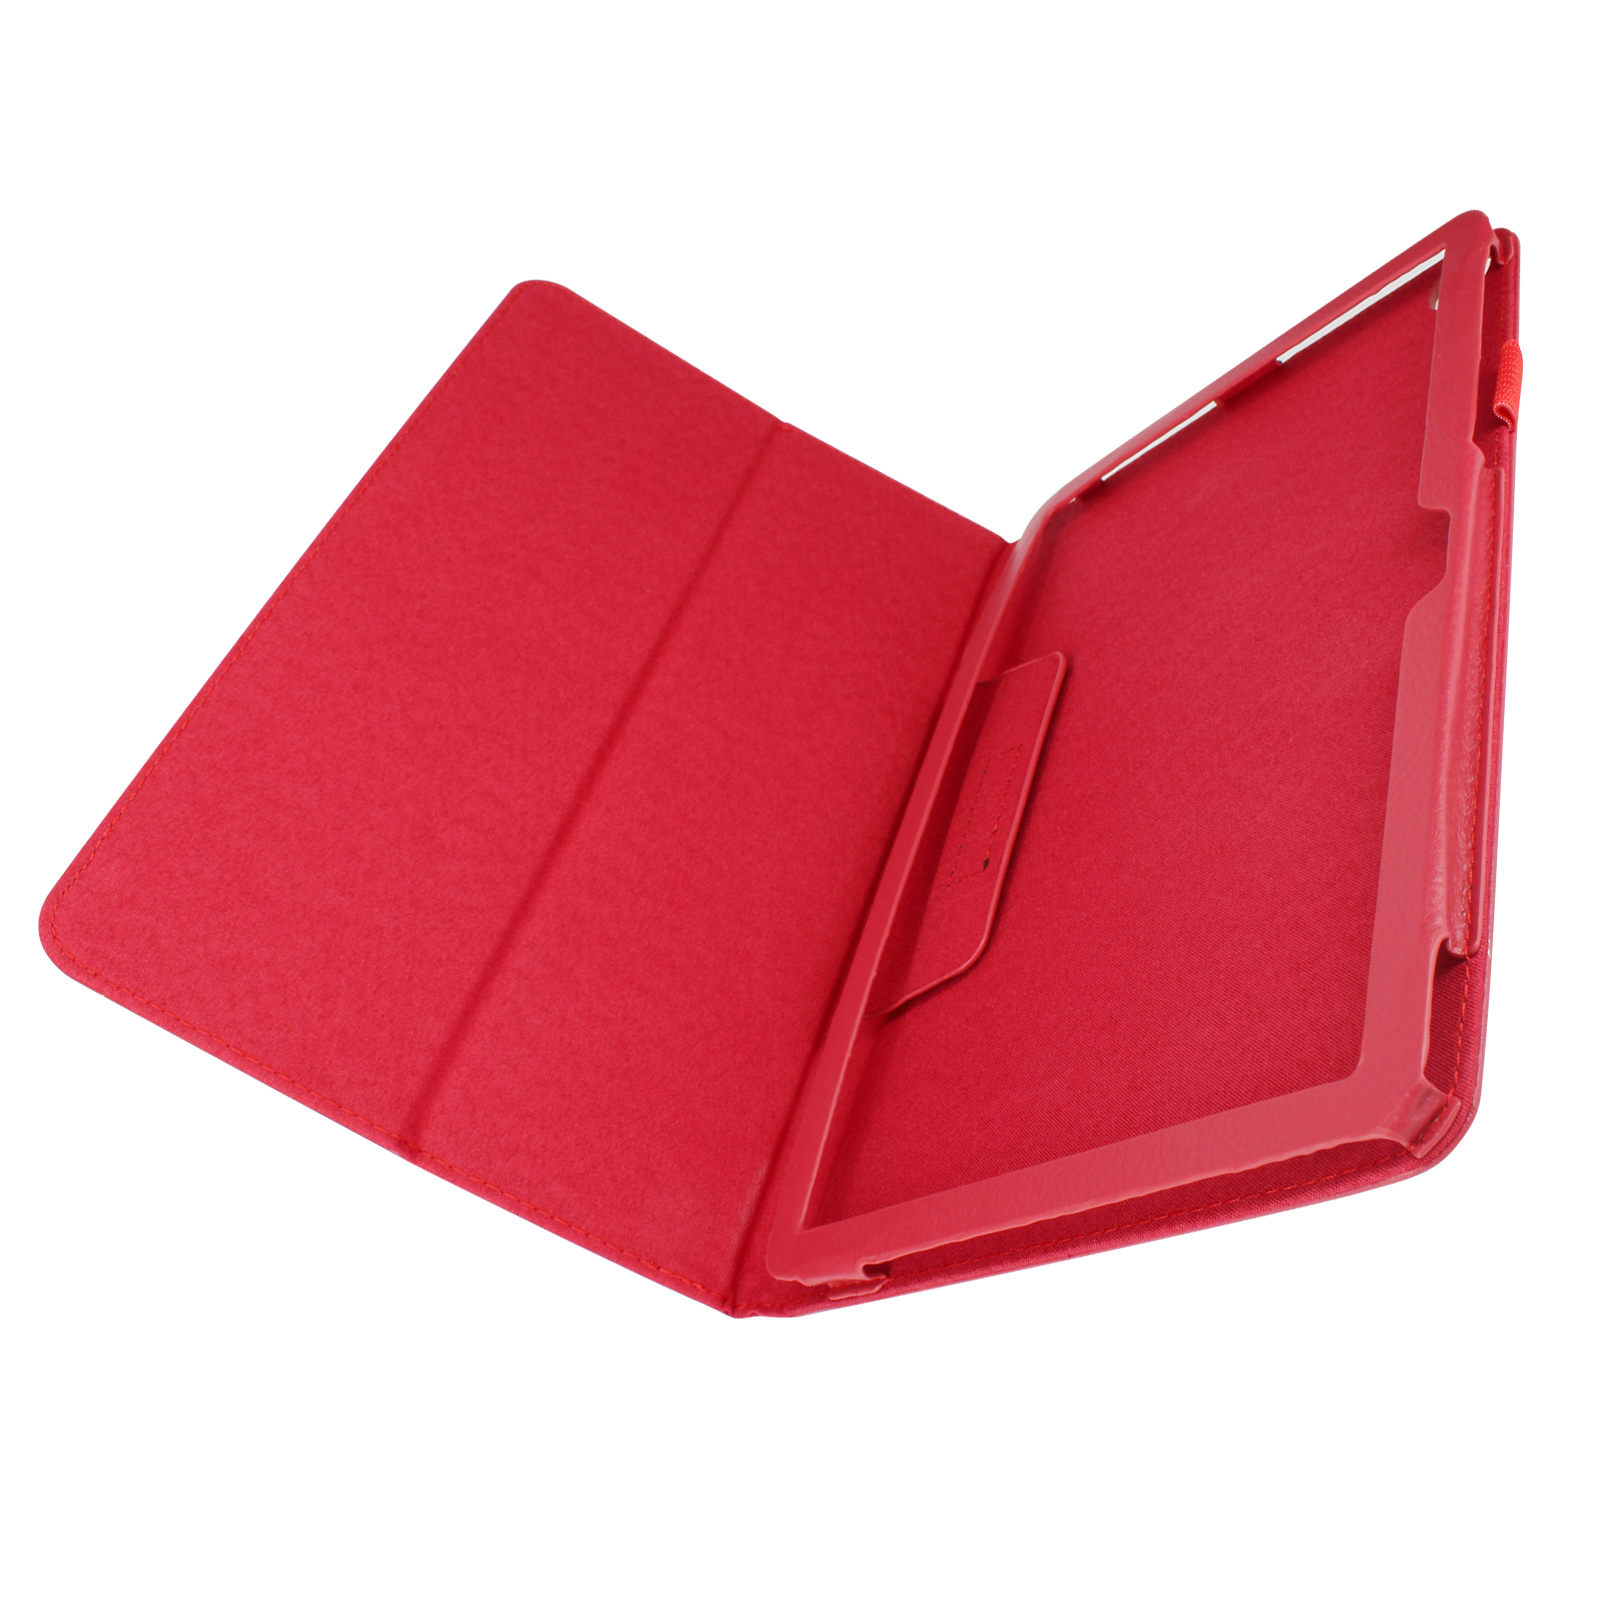 Bookcover, AVIZAR Polycarbonat Cover Huawei, MatePad Series, SE, Rot